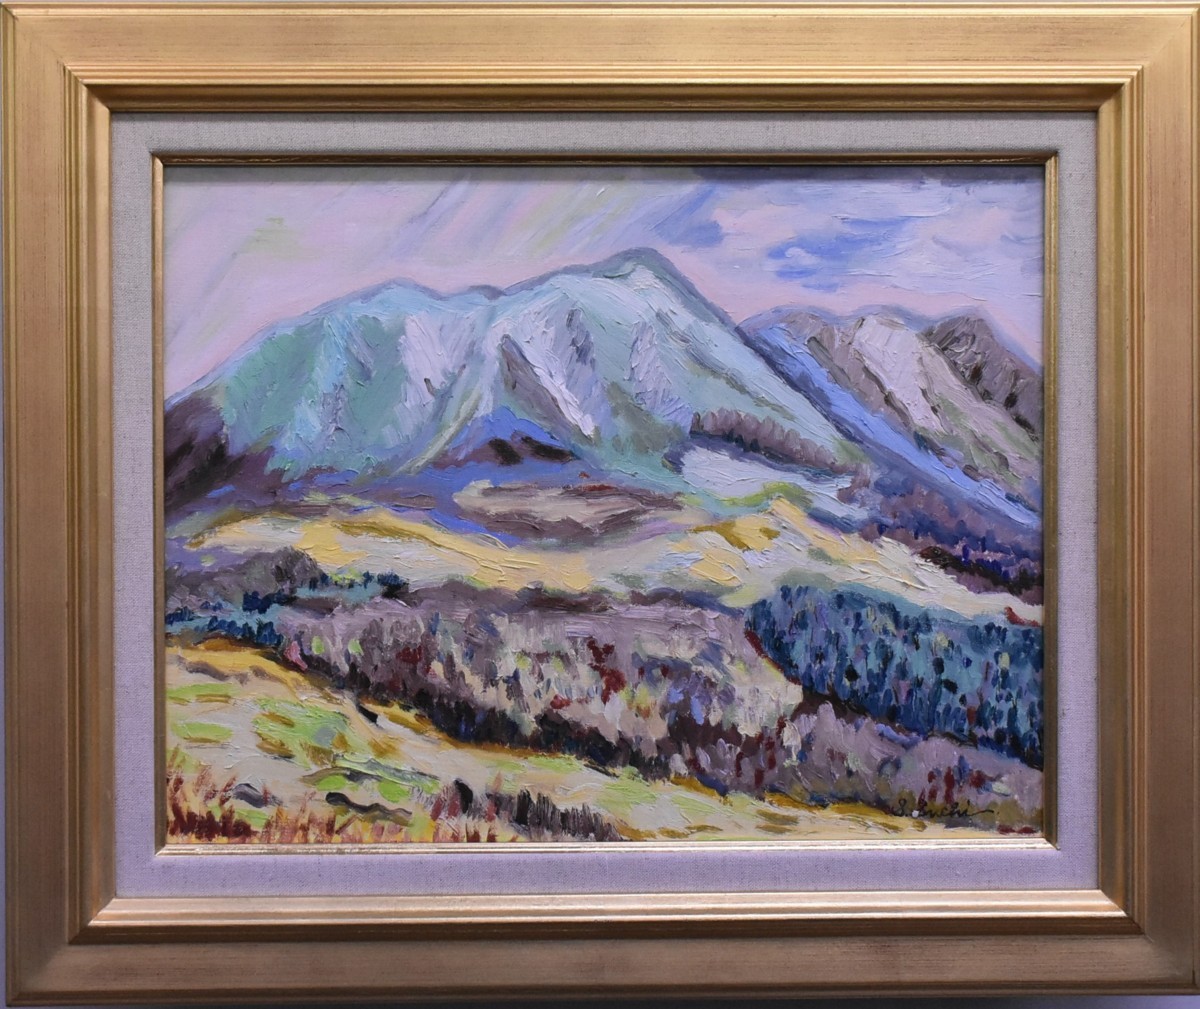 Great find: oil painting! Saburo Suchi, No. 6, Mountain Landscape, Gallery Masamitsu, Painting, Oil painting, Nature, Landscape painting